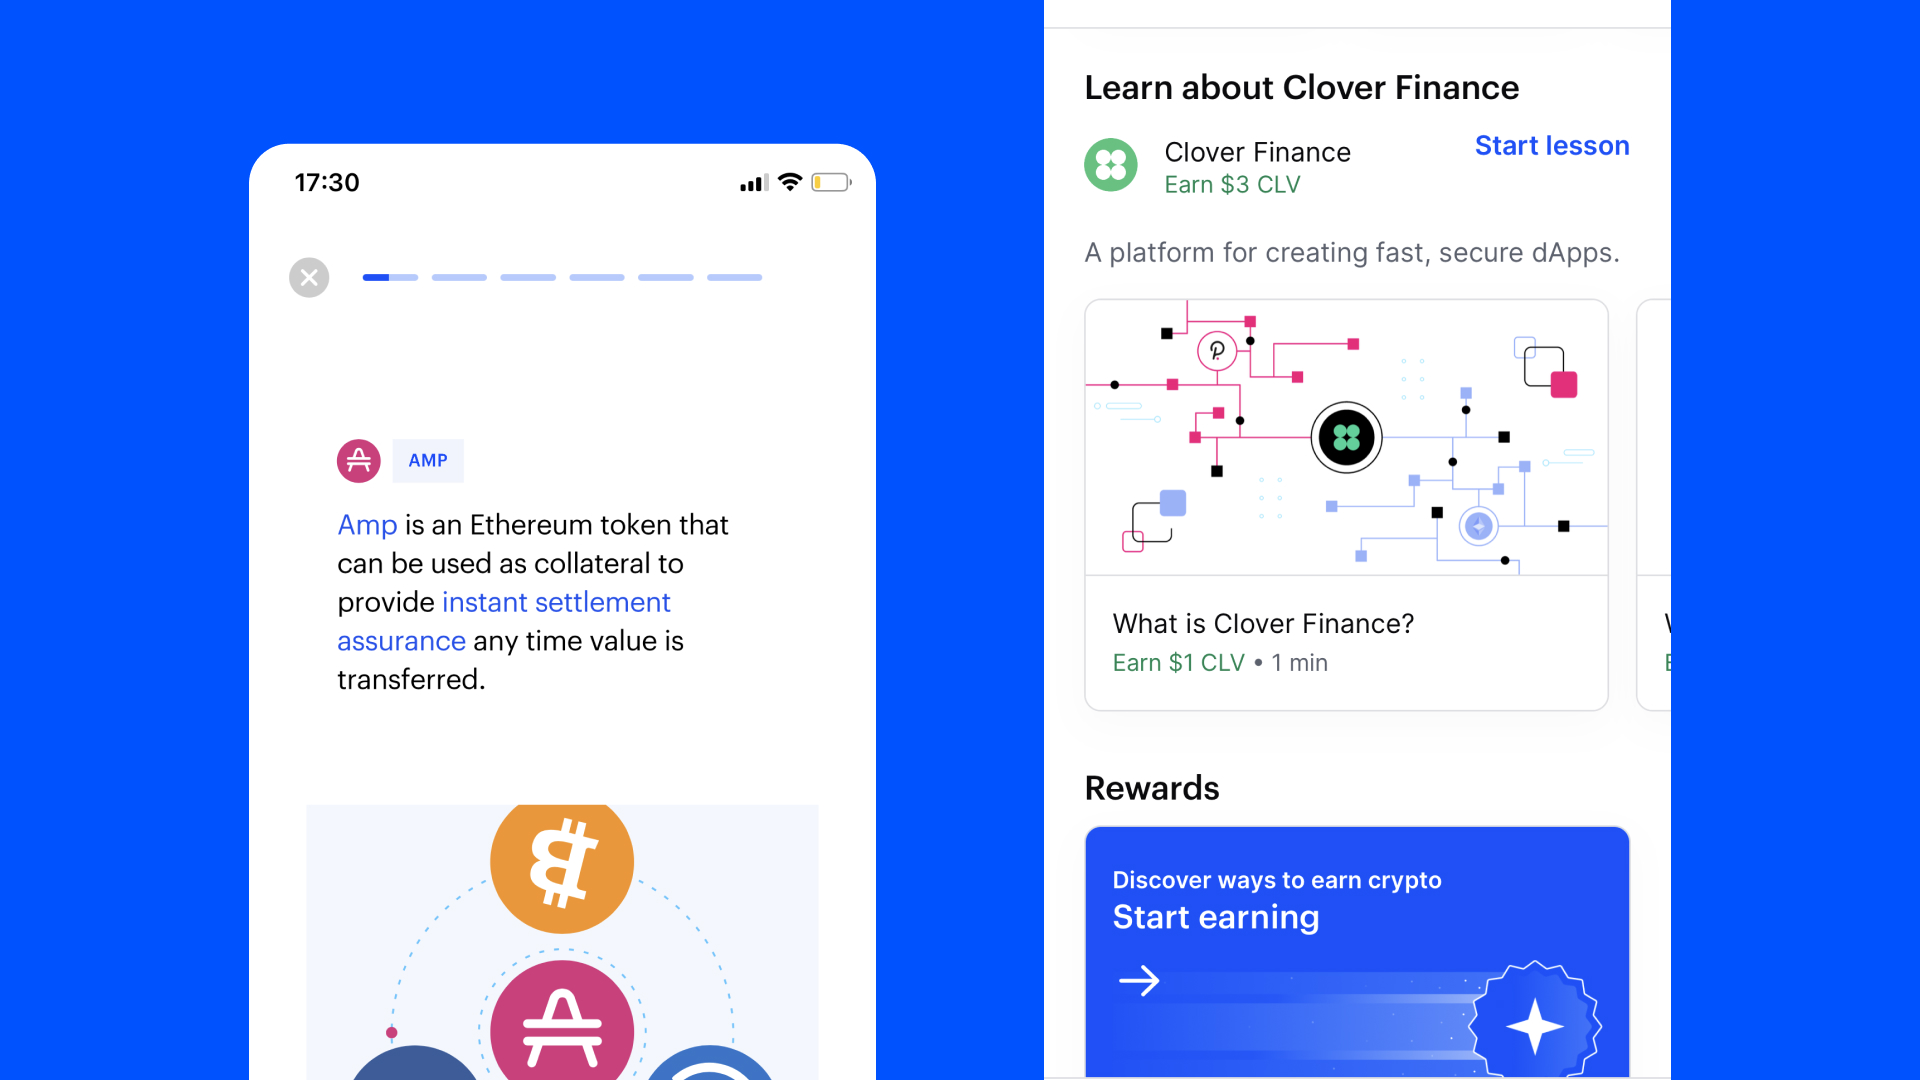 Images of Coinbase's tutorials about new cryptocurrencies and technologies.